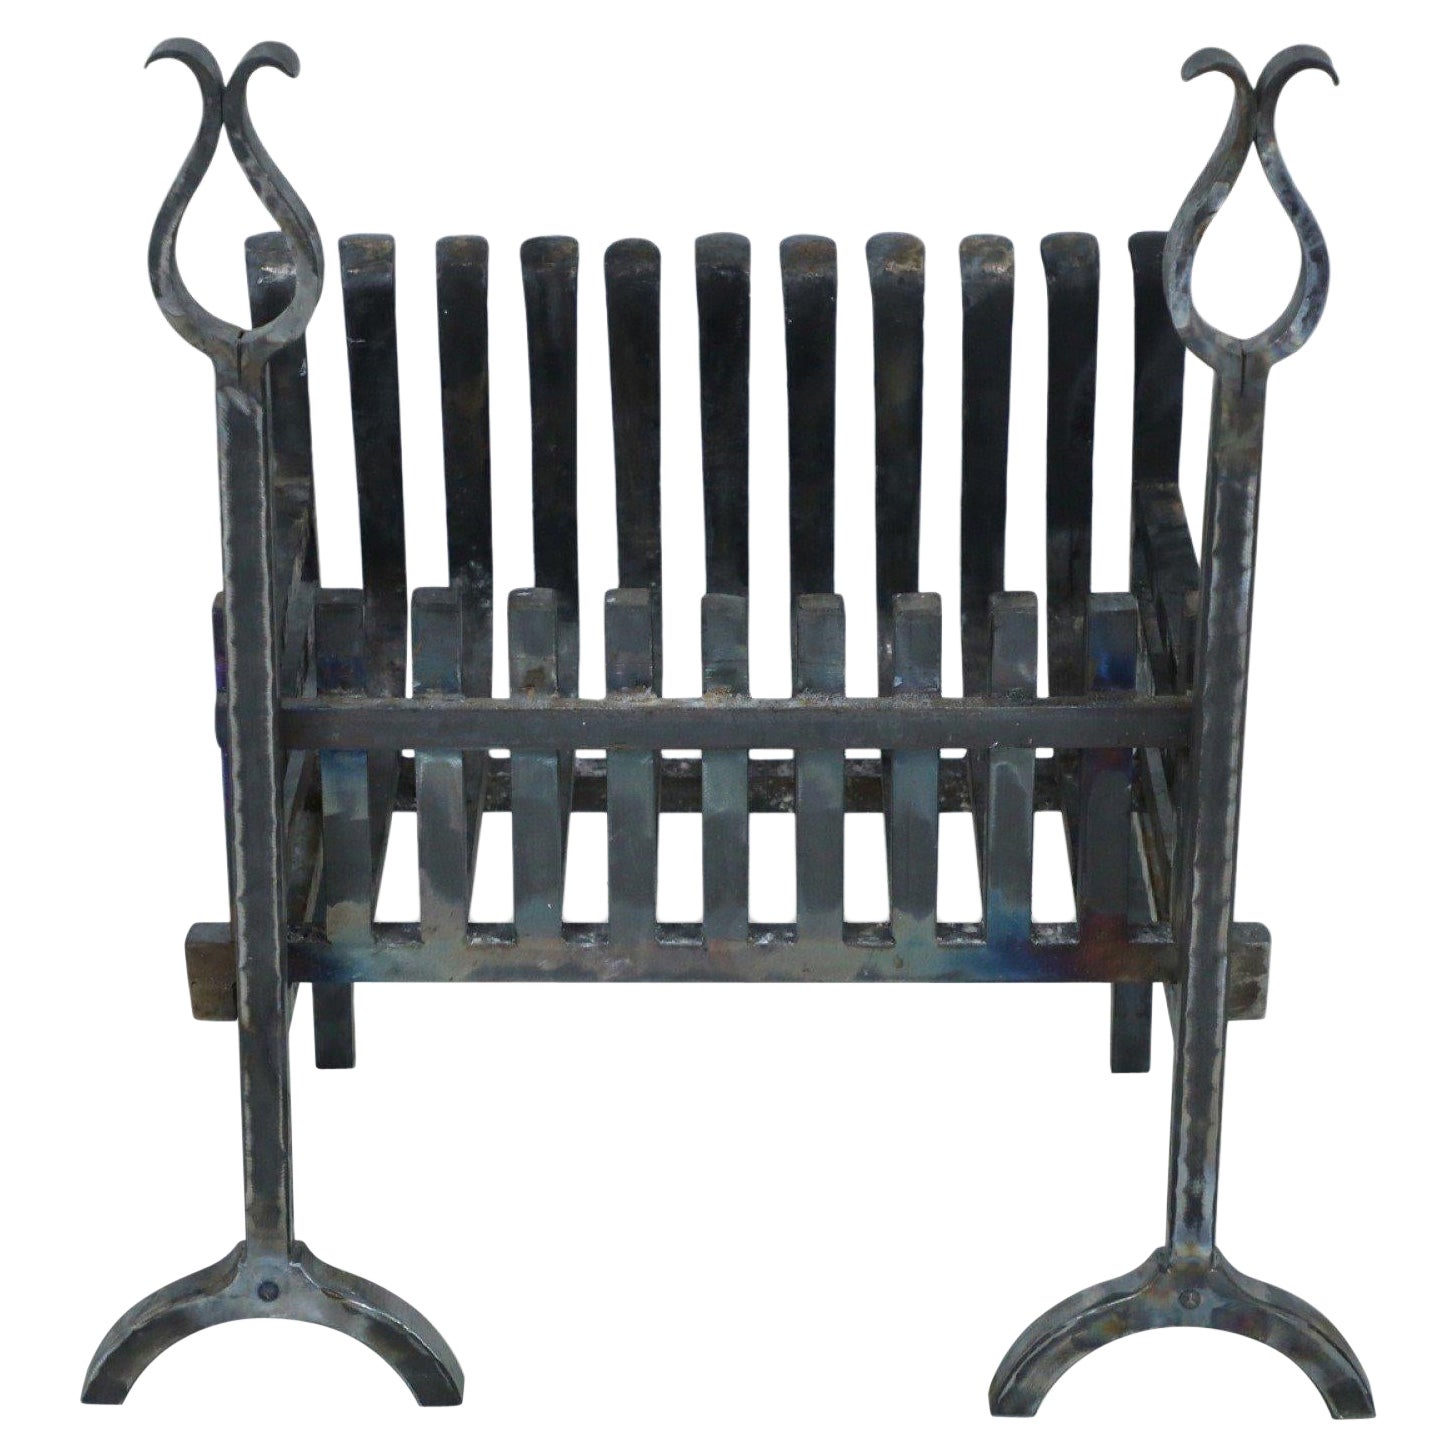 American Art Deco Iron Fire Grate with Andirons For Sale